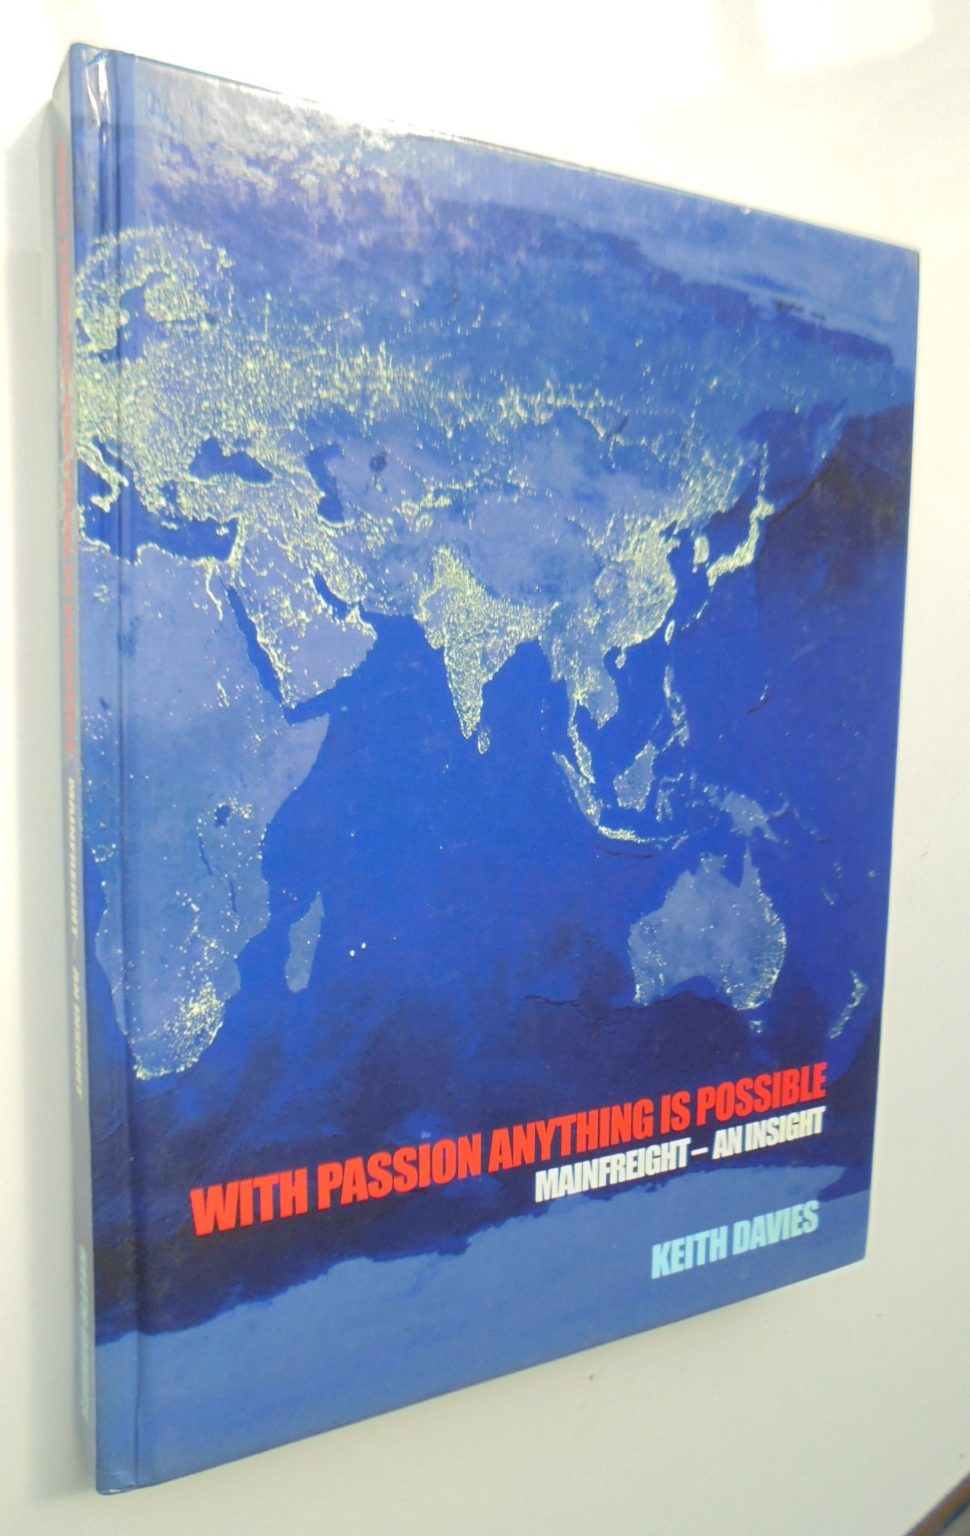 With Passion Anything is Possible MainFreight An Insight By Keith Davies. SIGNED